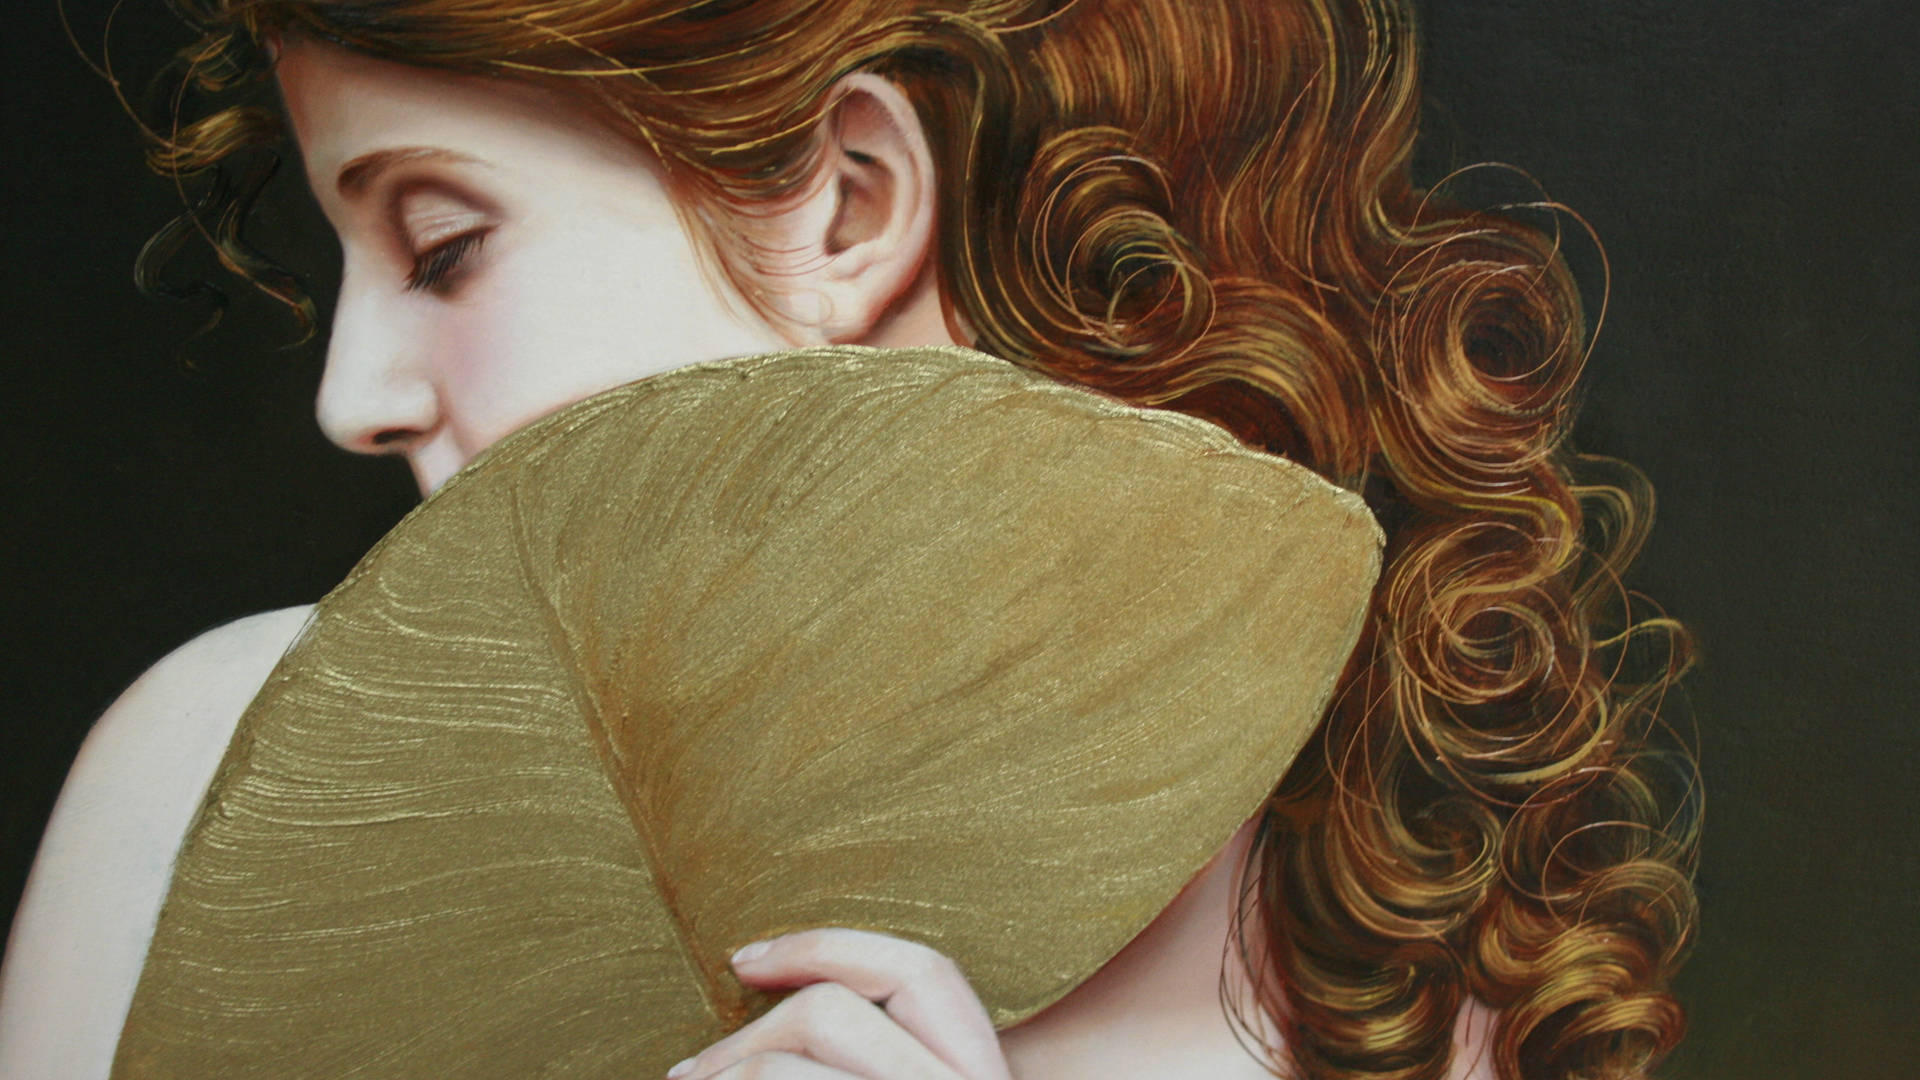 Red Hair Woman Painting By Christiane Vleugels Wallpaper